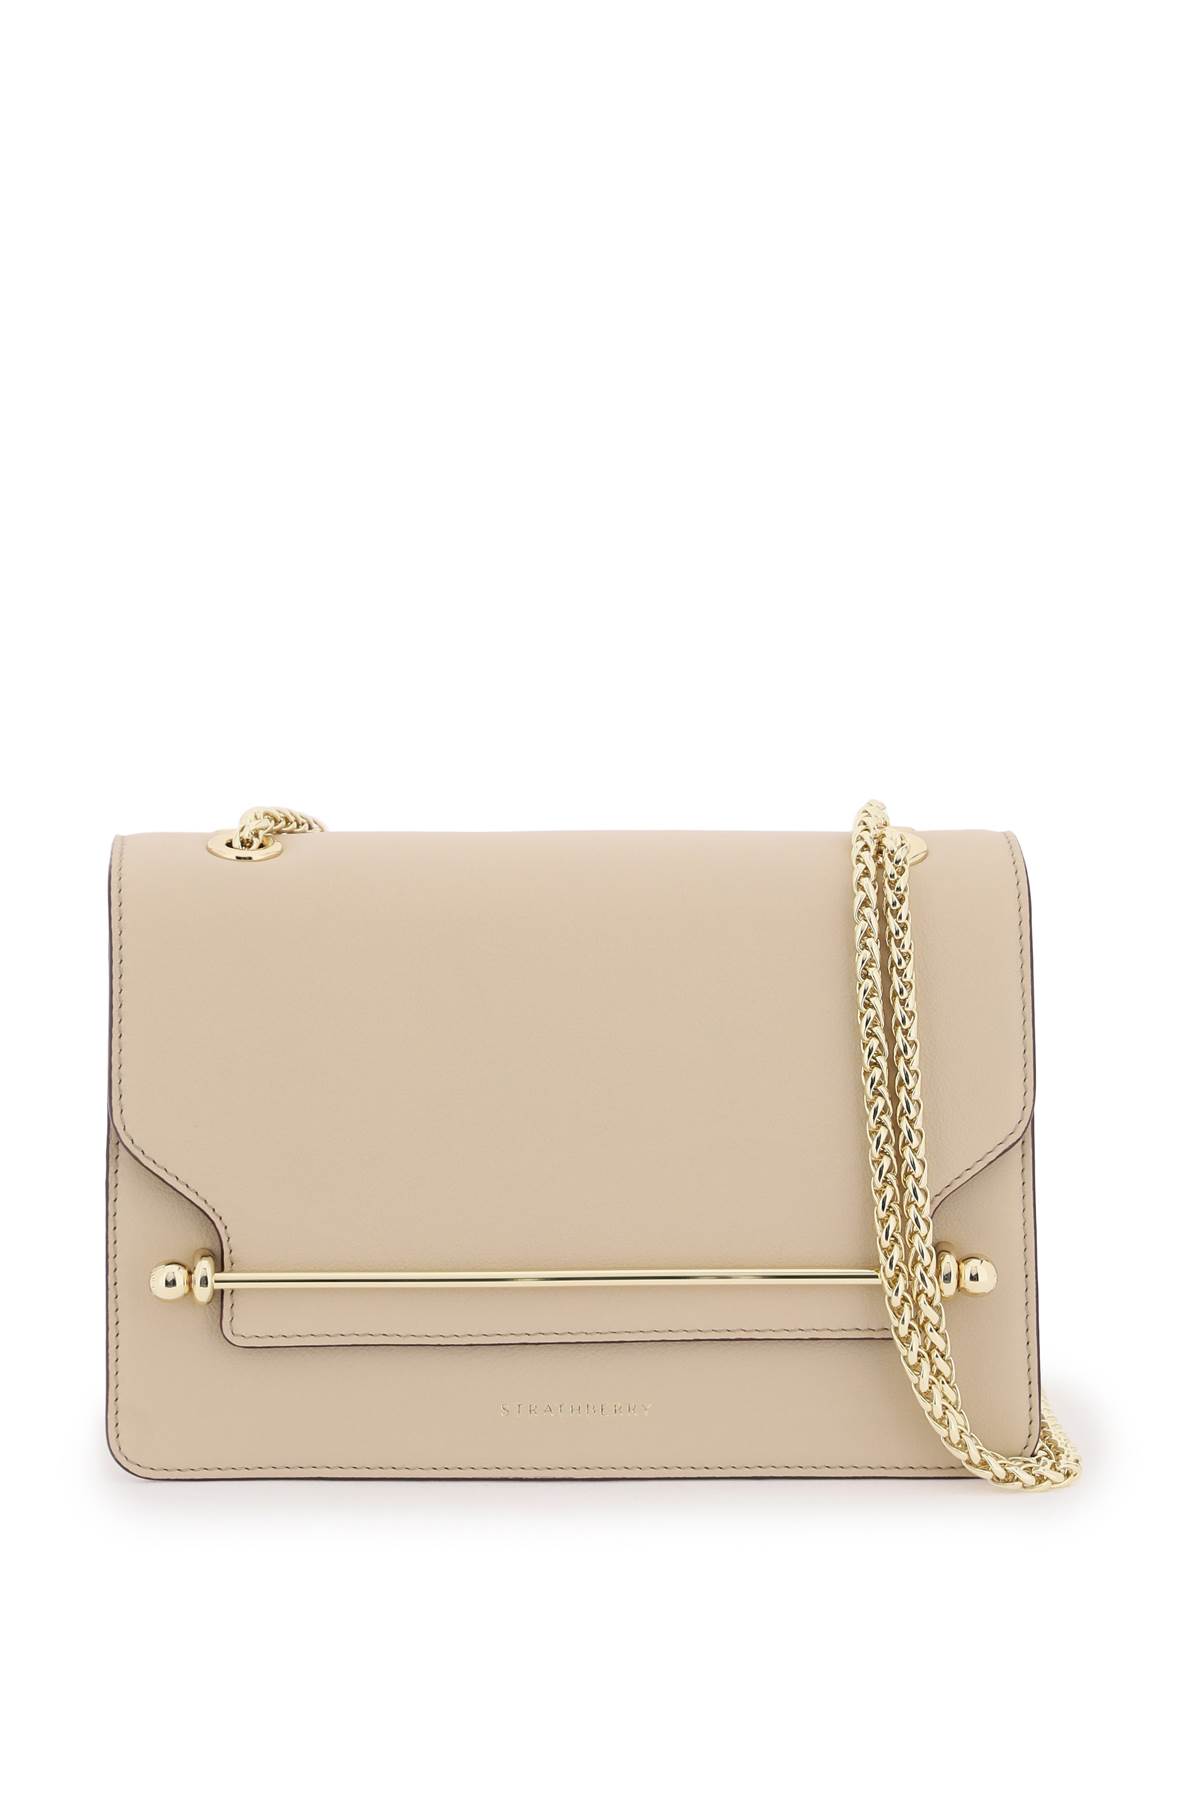 Strathberry East/west Leather Crossbody Bag In Forget Me Not